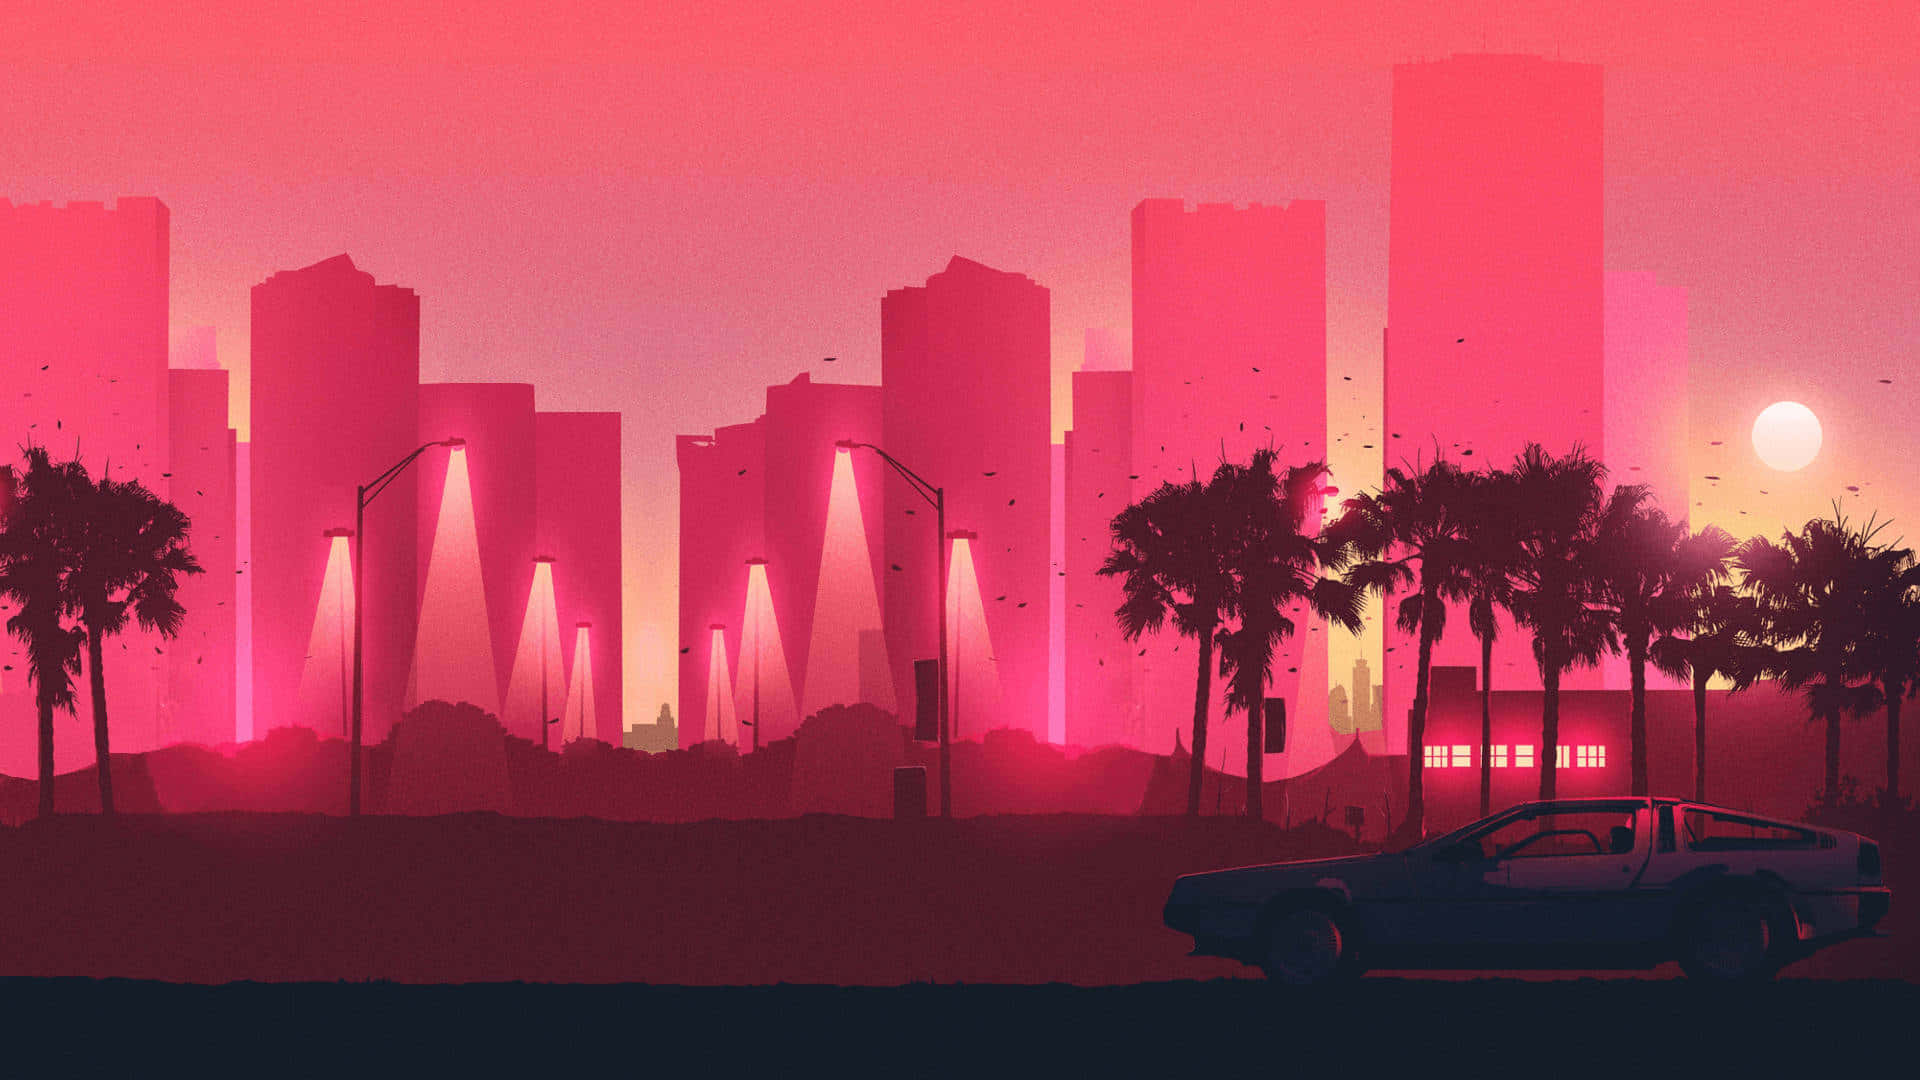 Synthwave 1920 X 1080 Wallpaper